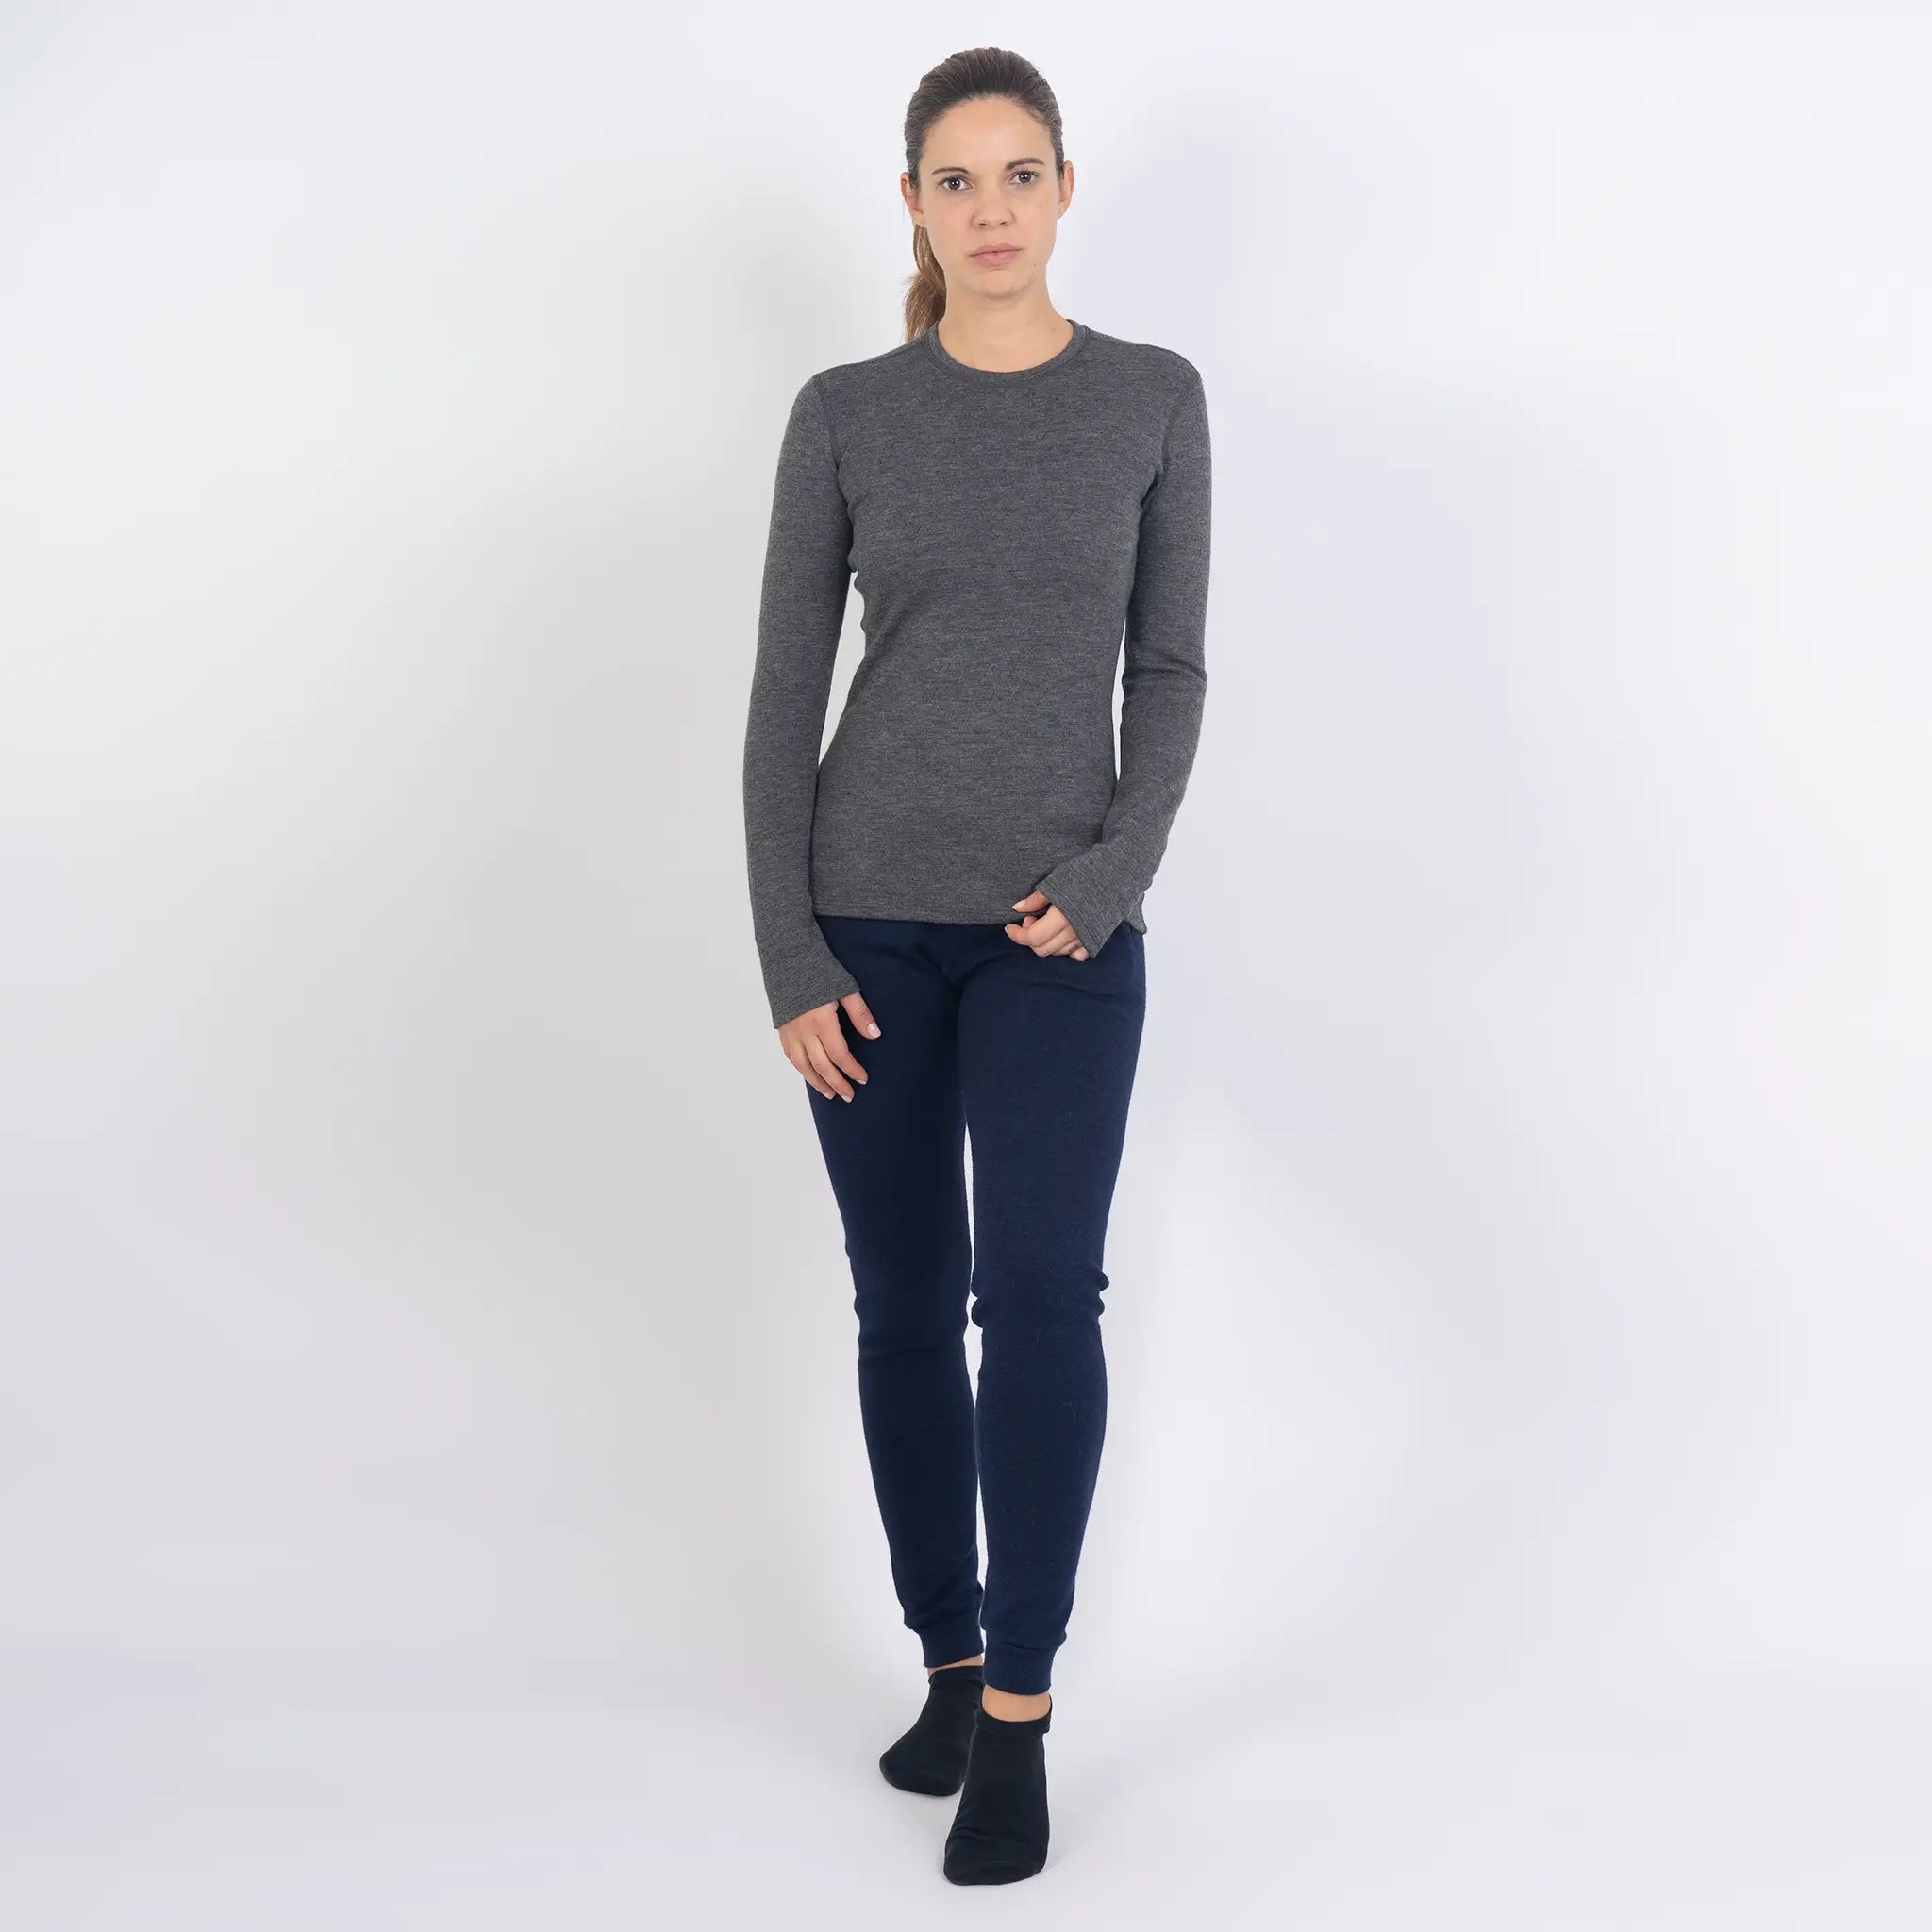 Women's Alpaca Wool Moisture-Wicking Base Layers | Arms of Andes